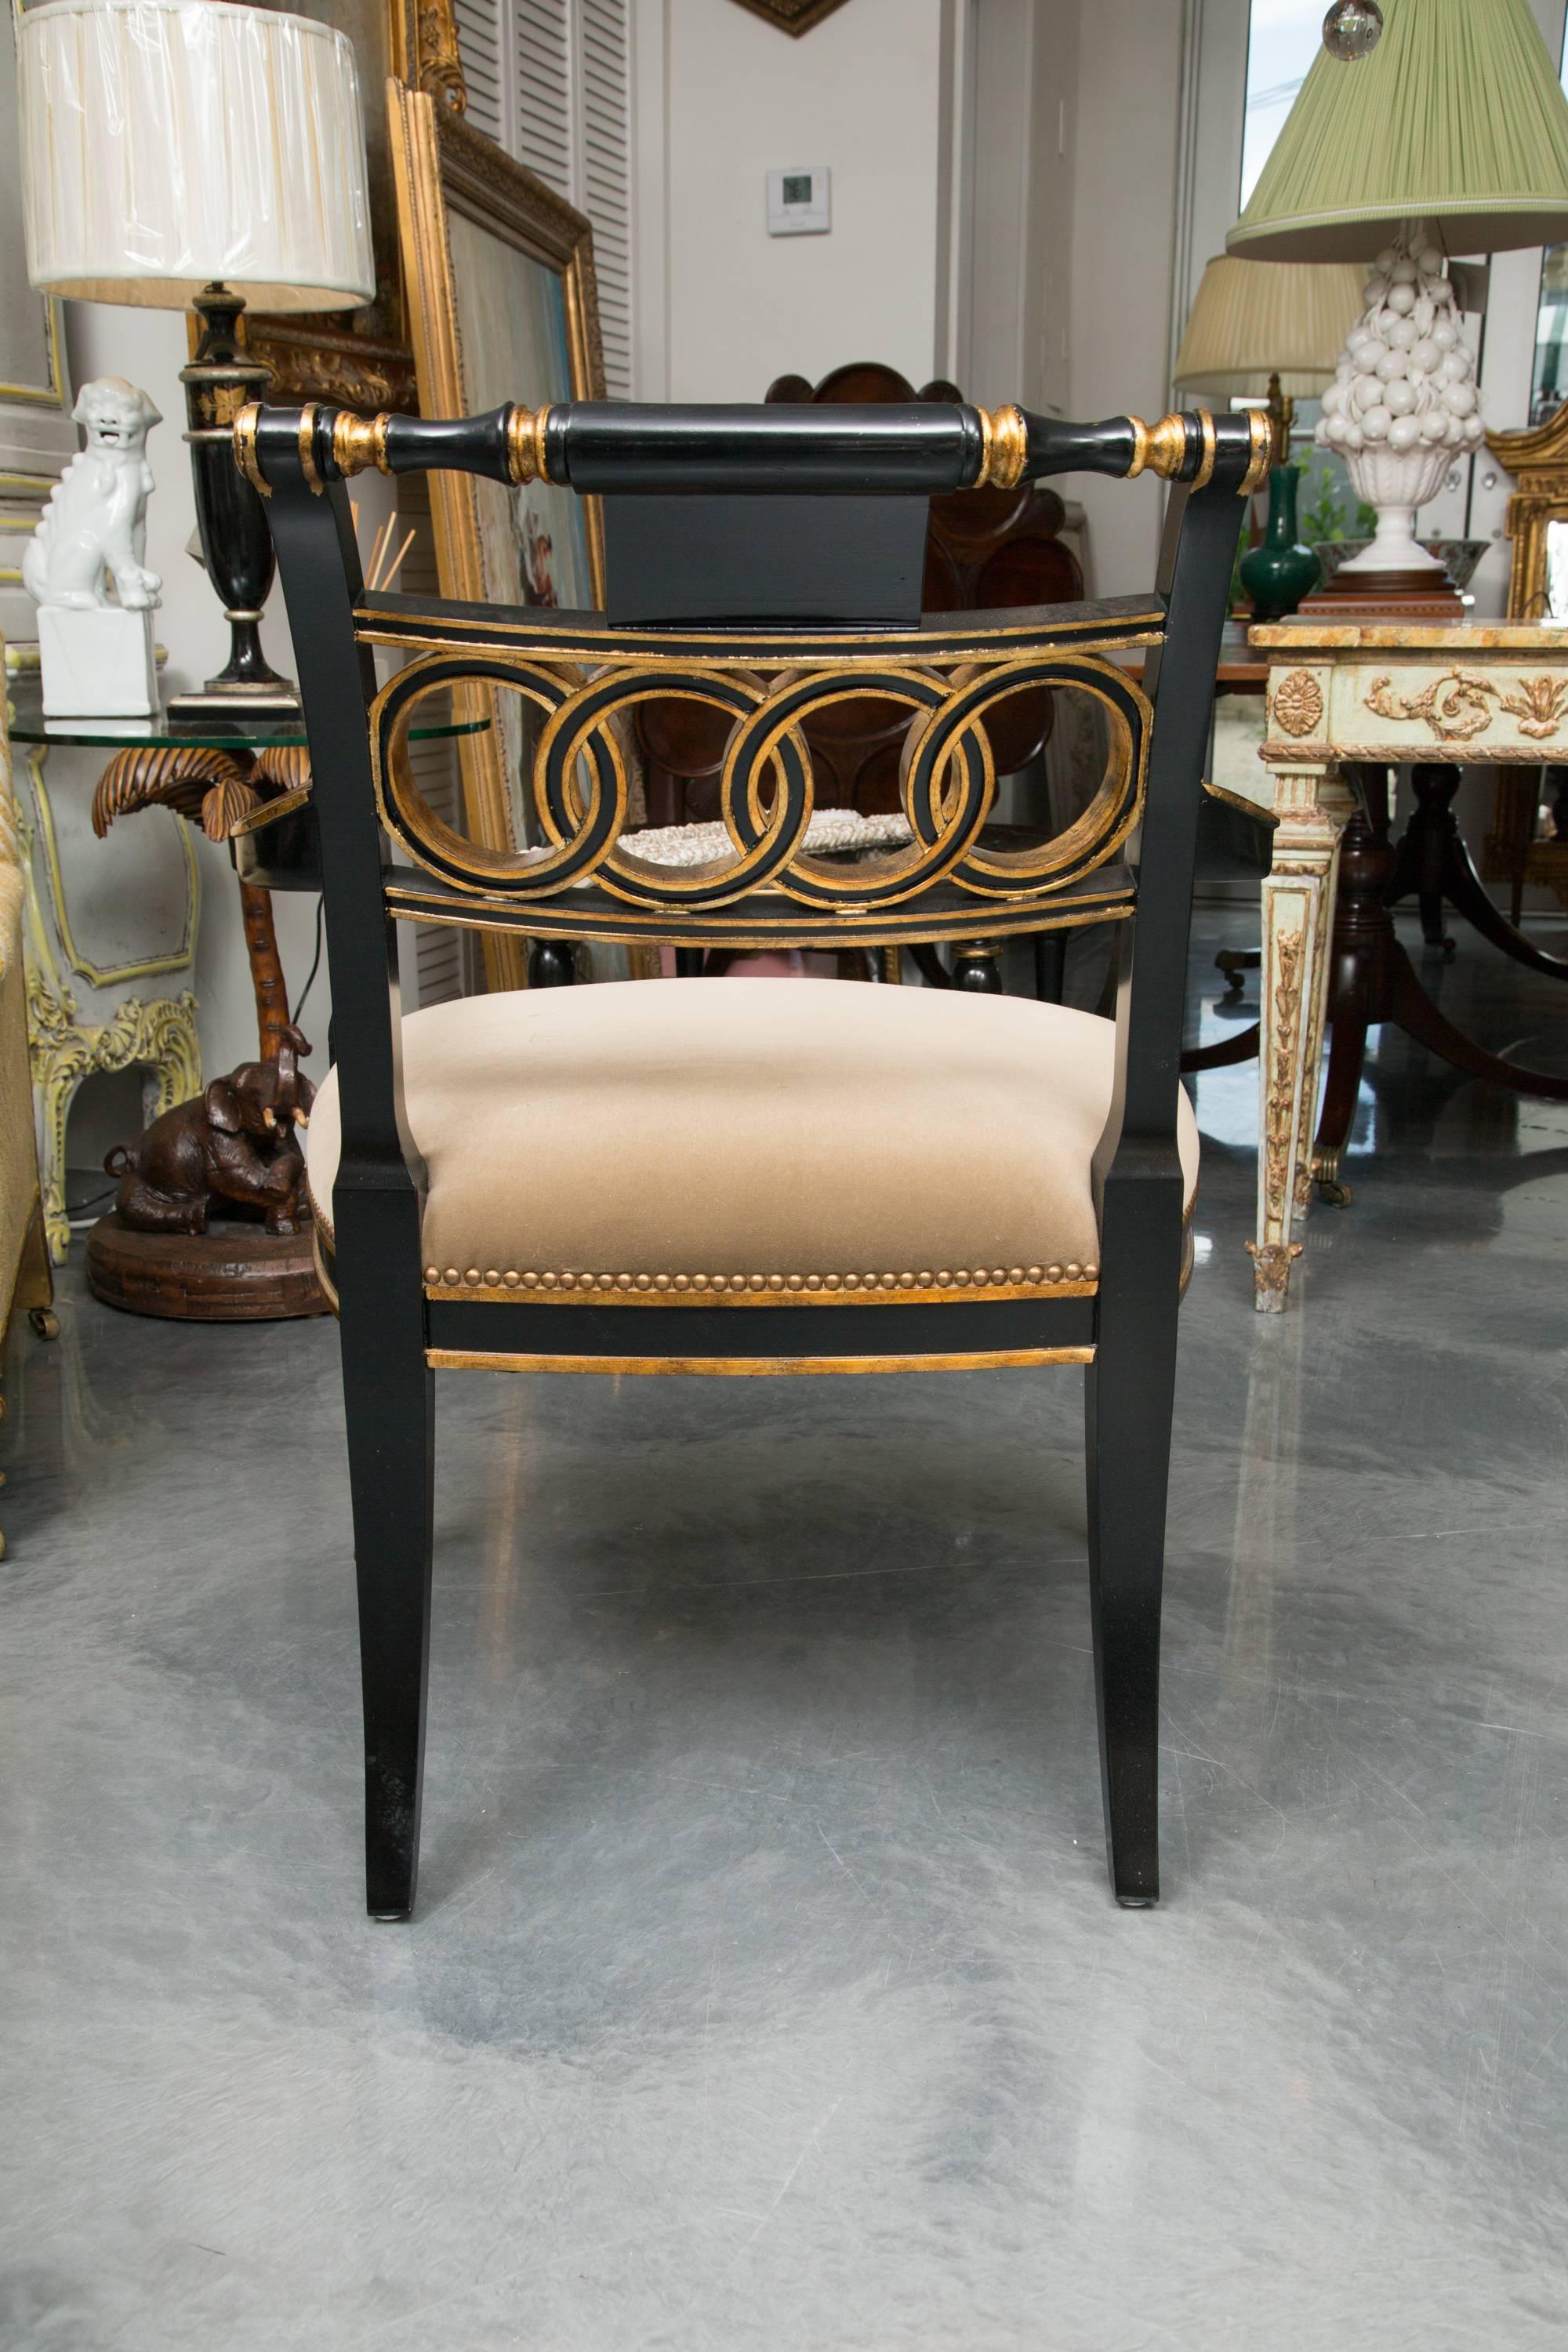 This is an elegant ebonized and parcel-gilt Regency style armchair with a top rail over a backsplat carved with concentric circles, flanked by gently curved arms above a padded seat and raised on faux bamboo carved legs, 20th century.